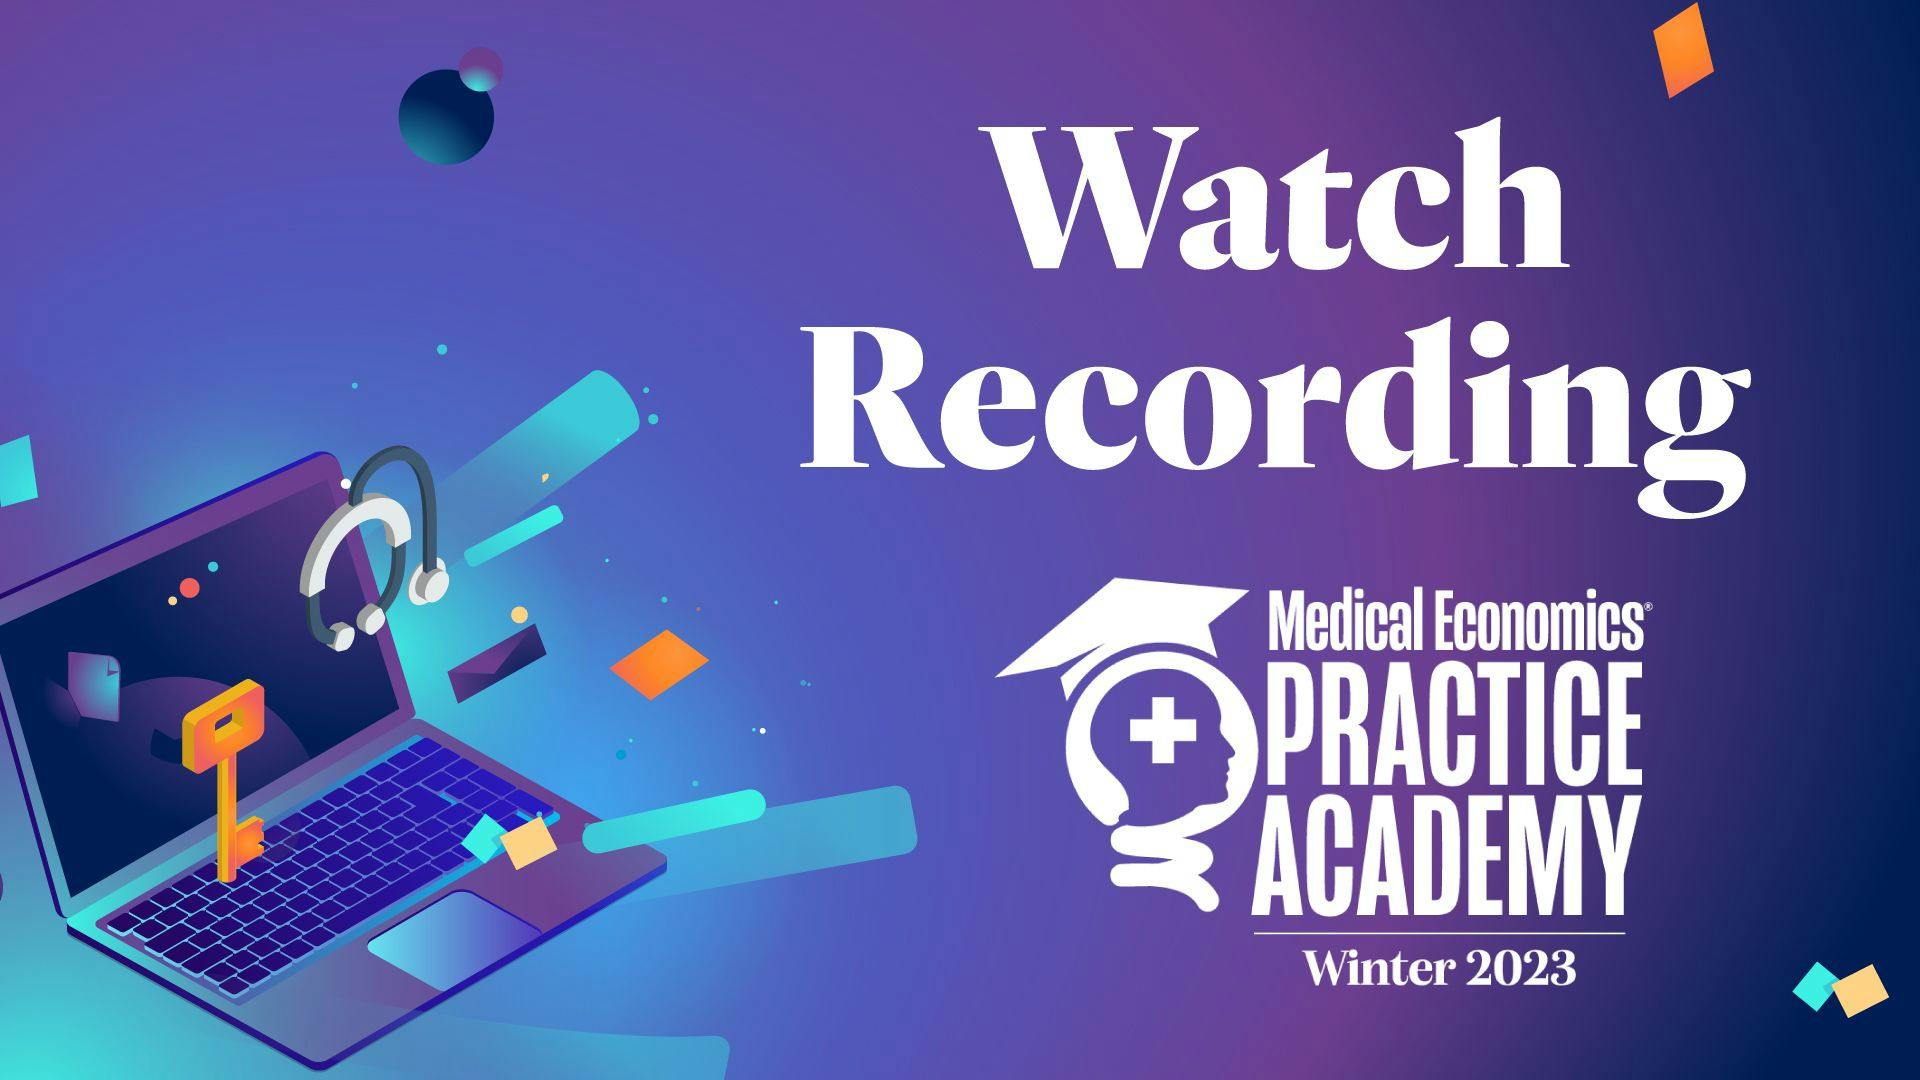 2023 in Medical Economics, No. 5: Practice Academy takes off